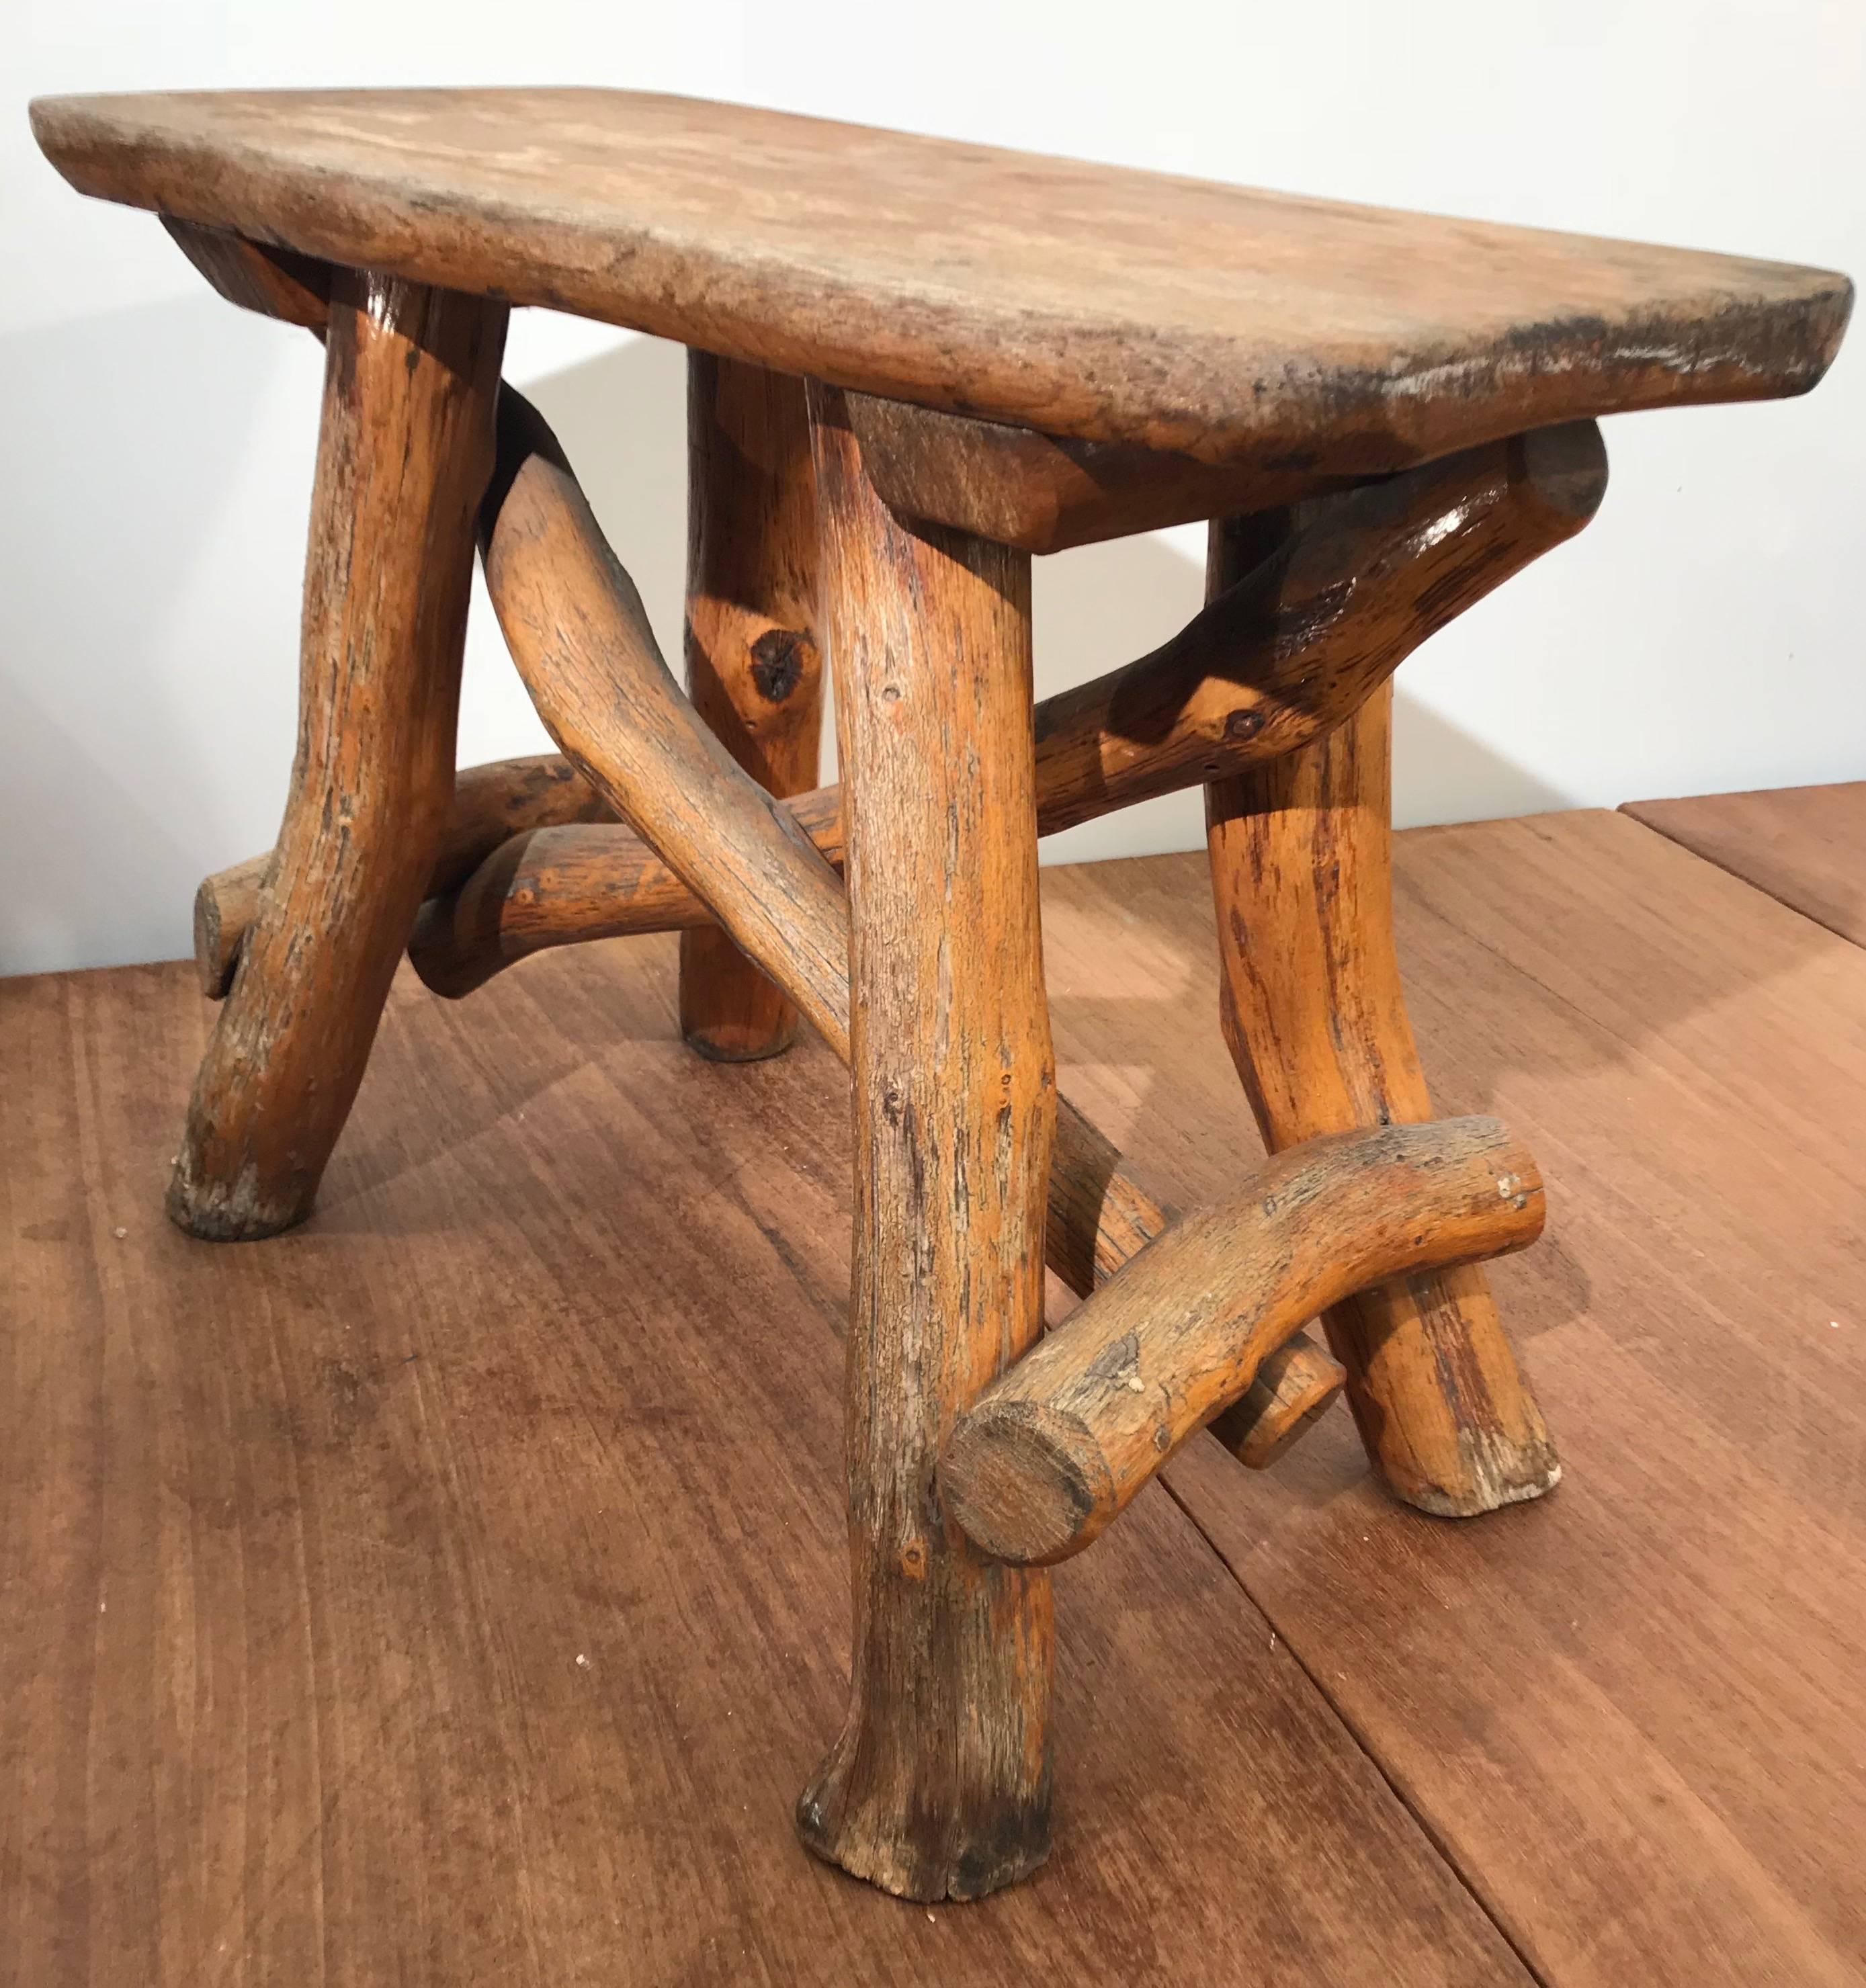 Antique Hand-Crafted Rustic and Organic Oak Tree Stool for Indoor or Outdoor For Sale 2